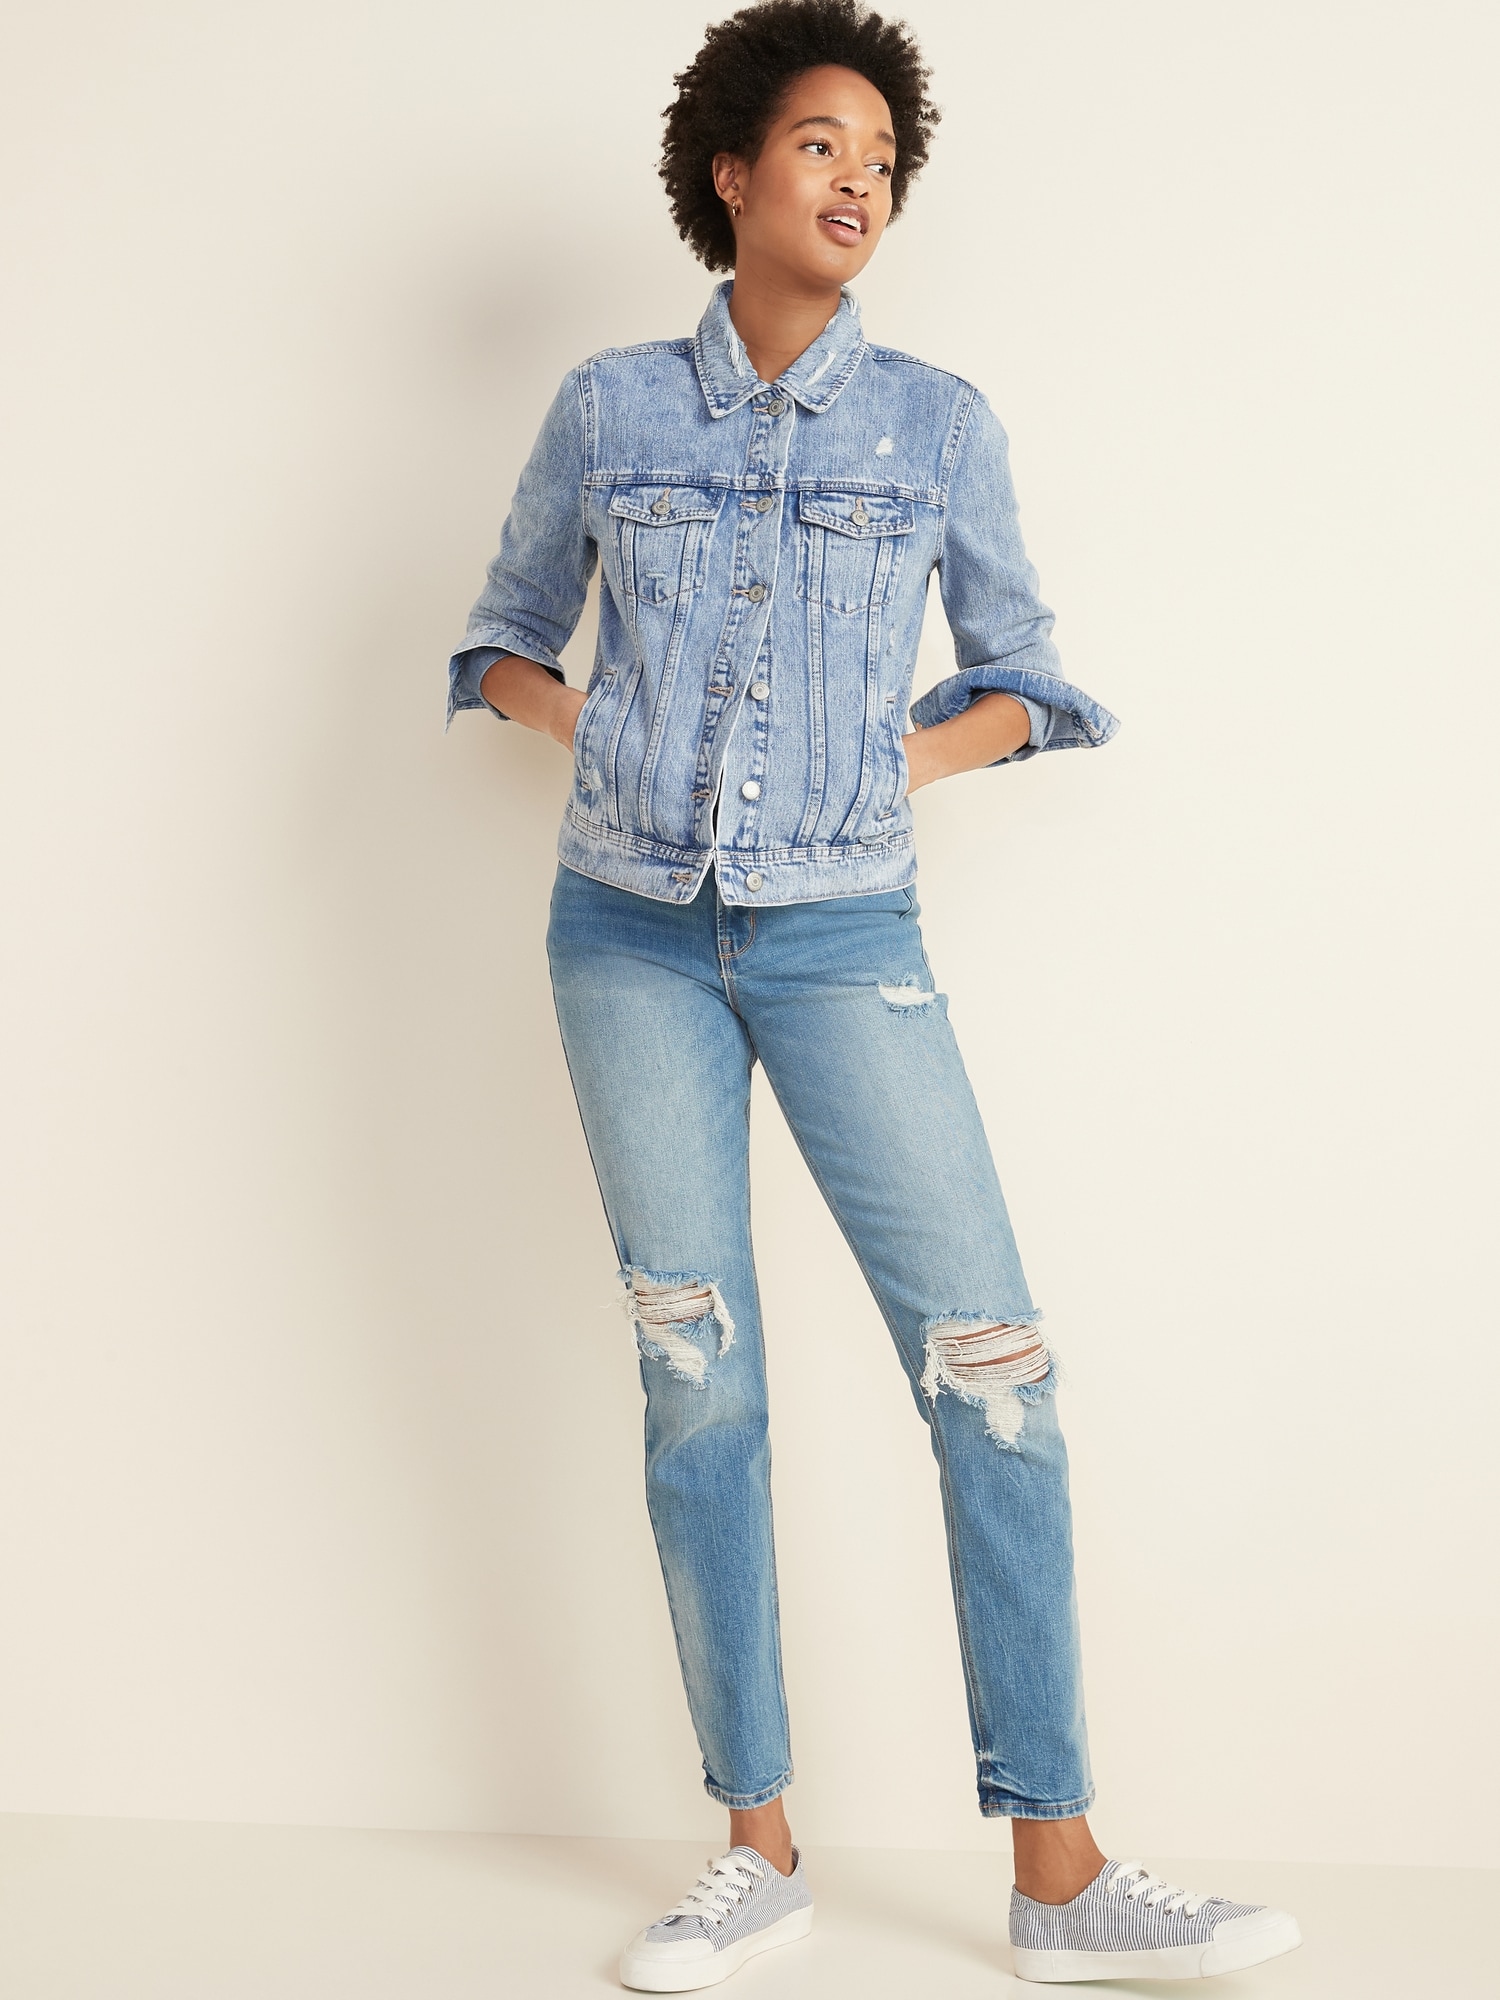 Distressed Jean Jacket For Women Old Navy